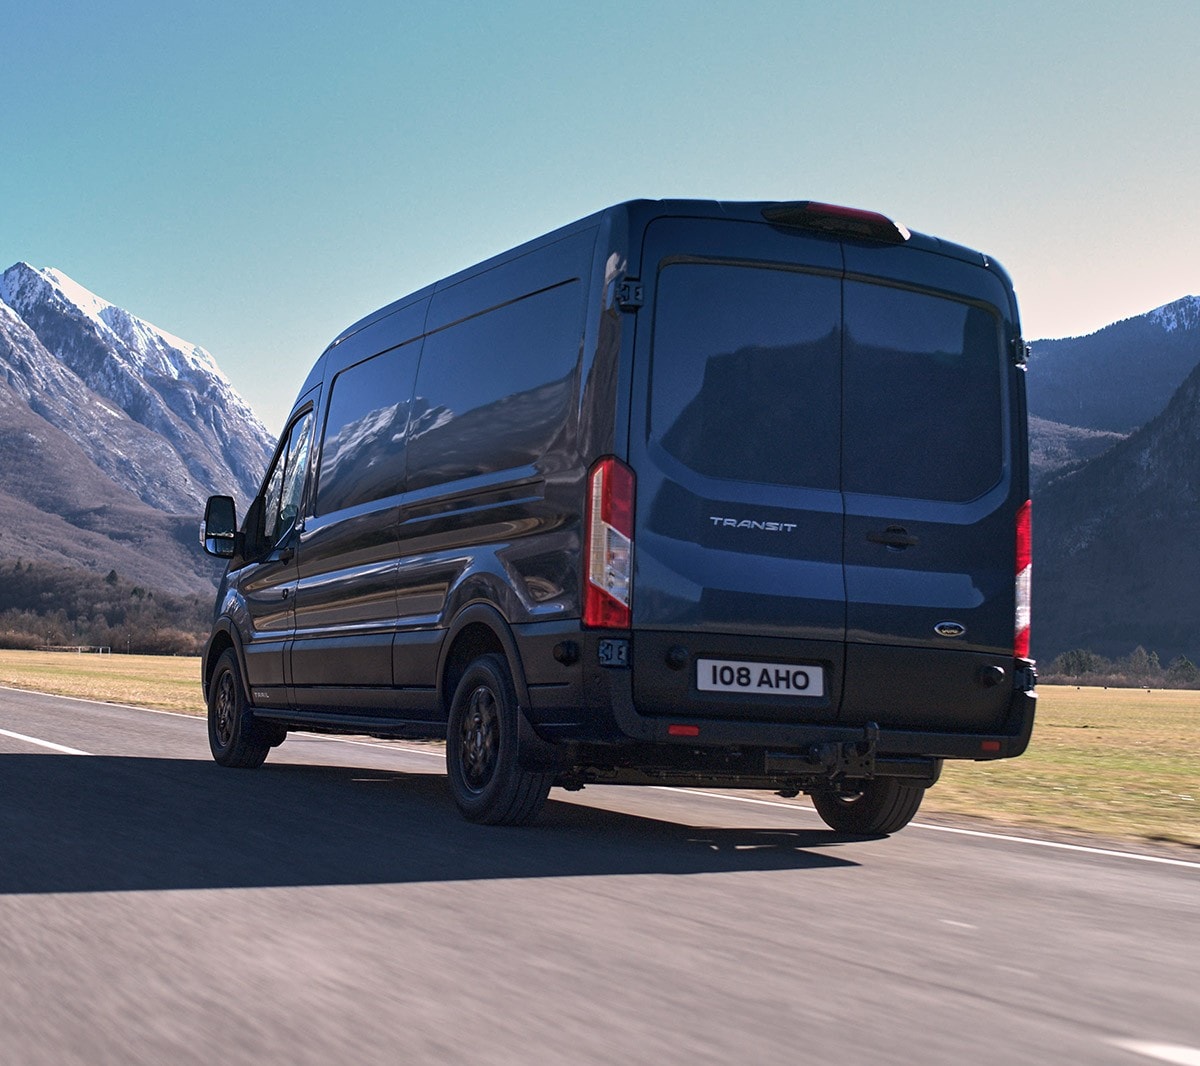 new Ford Transit Van Trail driving on mountain road